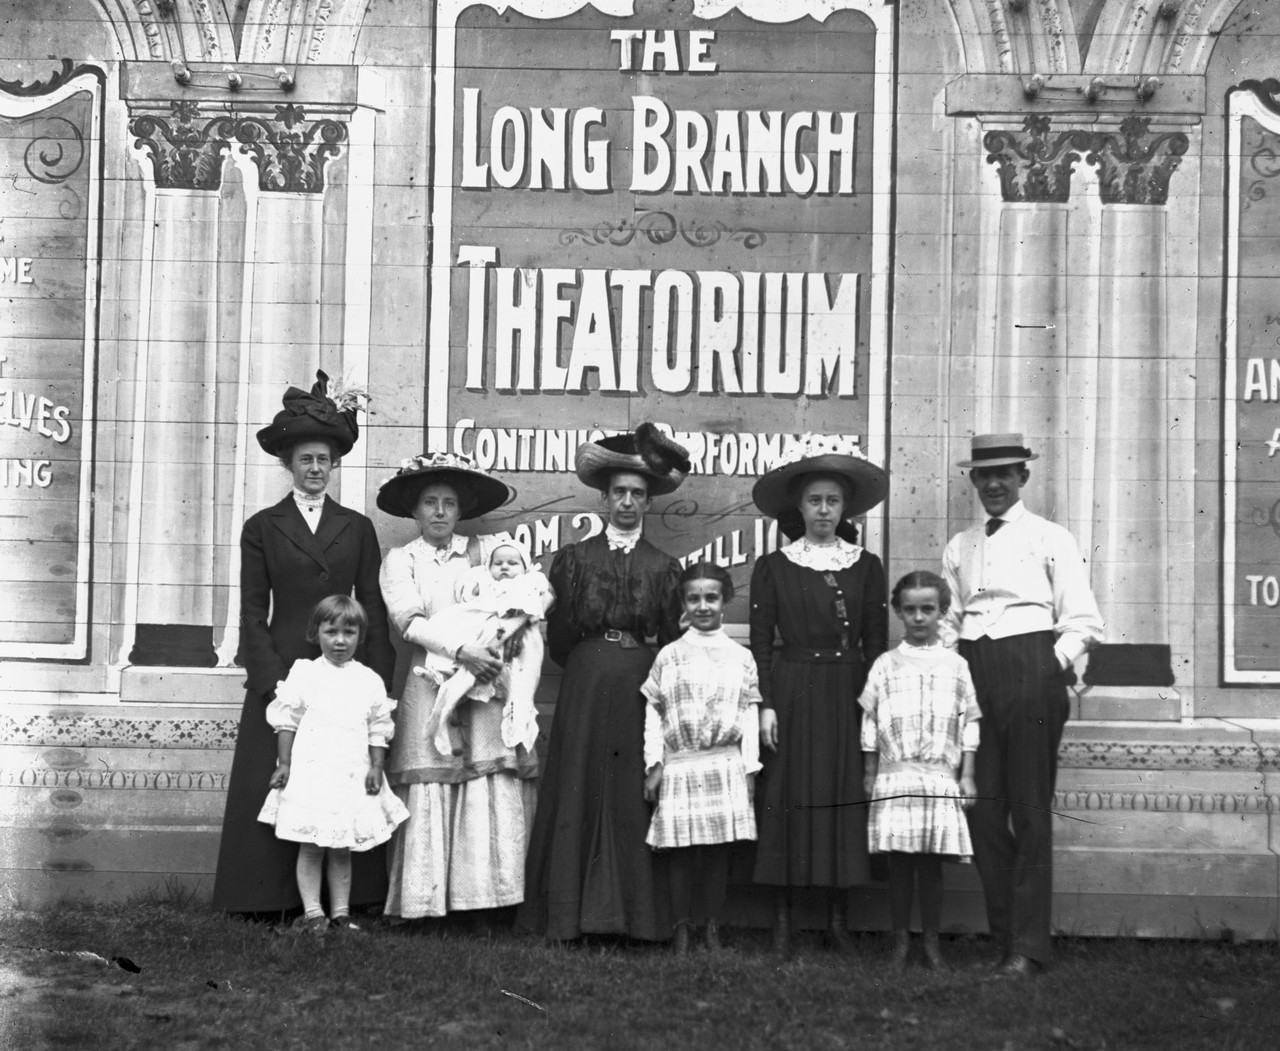 Family outing to the Long Branch Theatorium